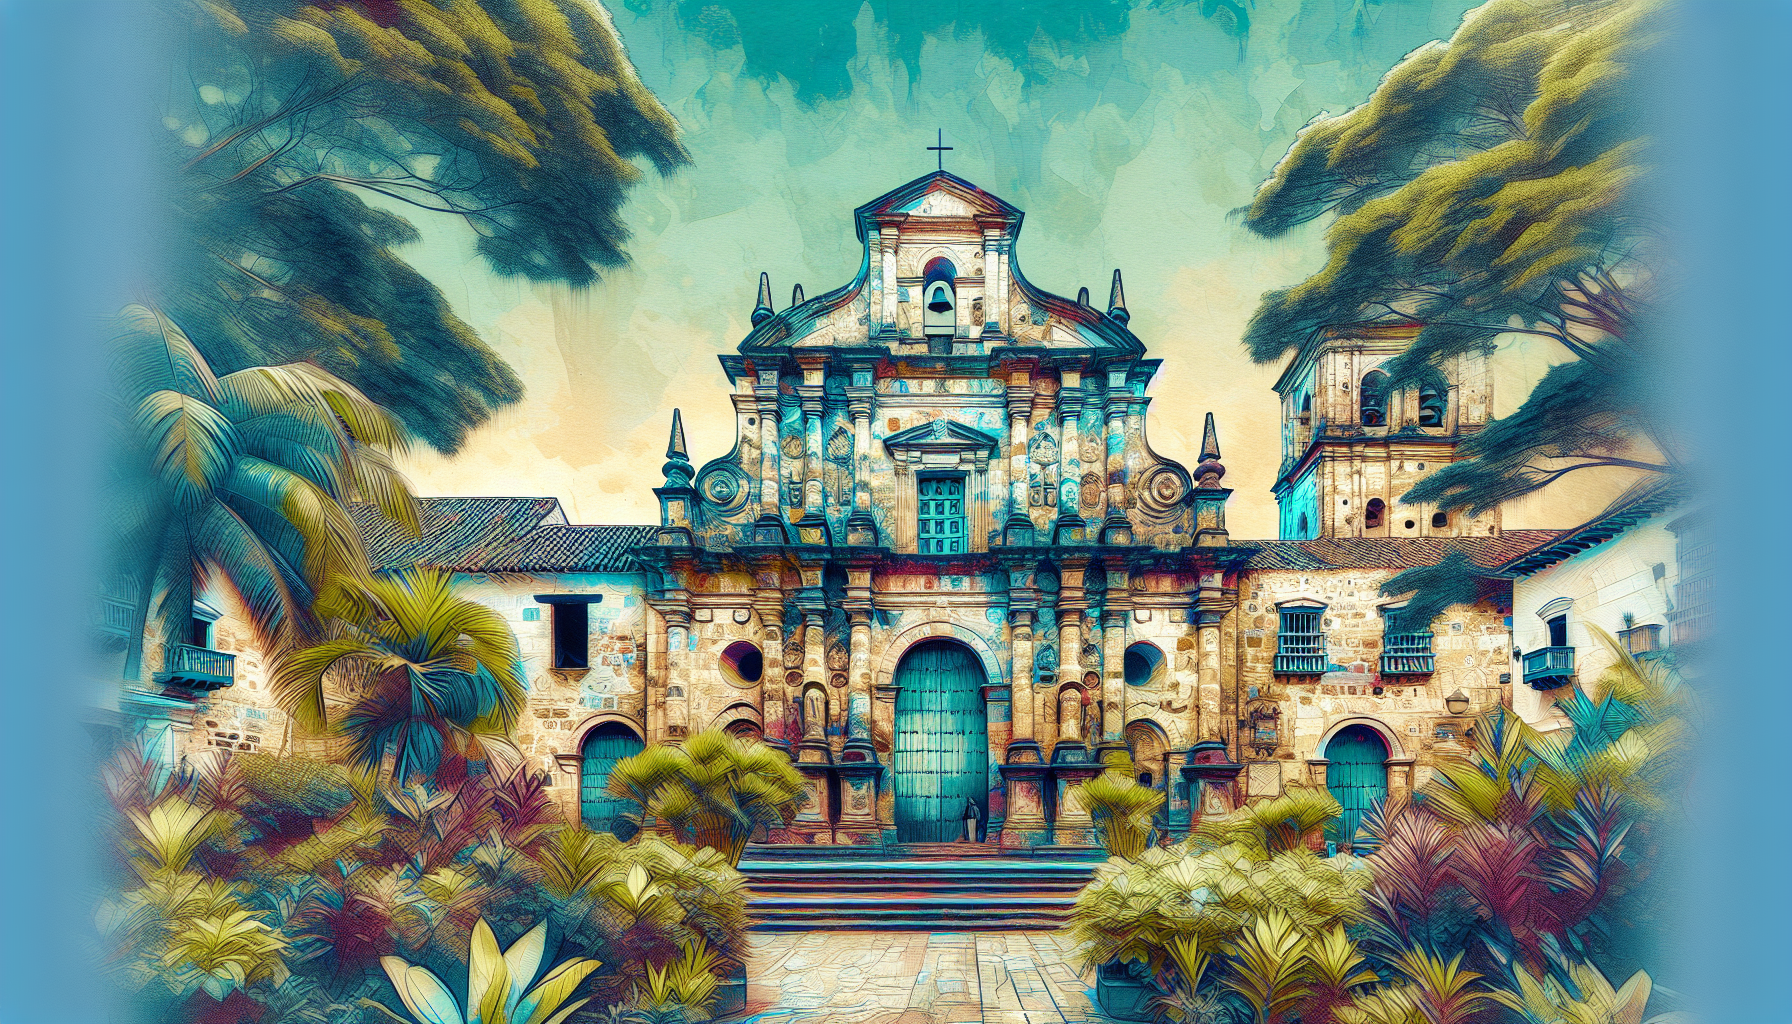 An artistic depiction of the Iglesia de San Francisco, the oldest church in Colombia, showcasing its historic stone facade and colonial architectural features. Include surrounding lush greenery and a